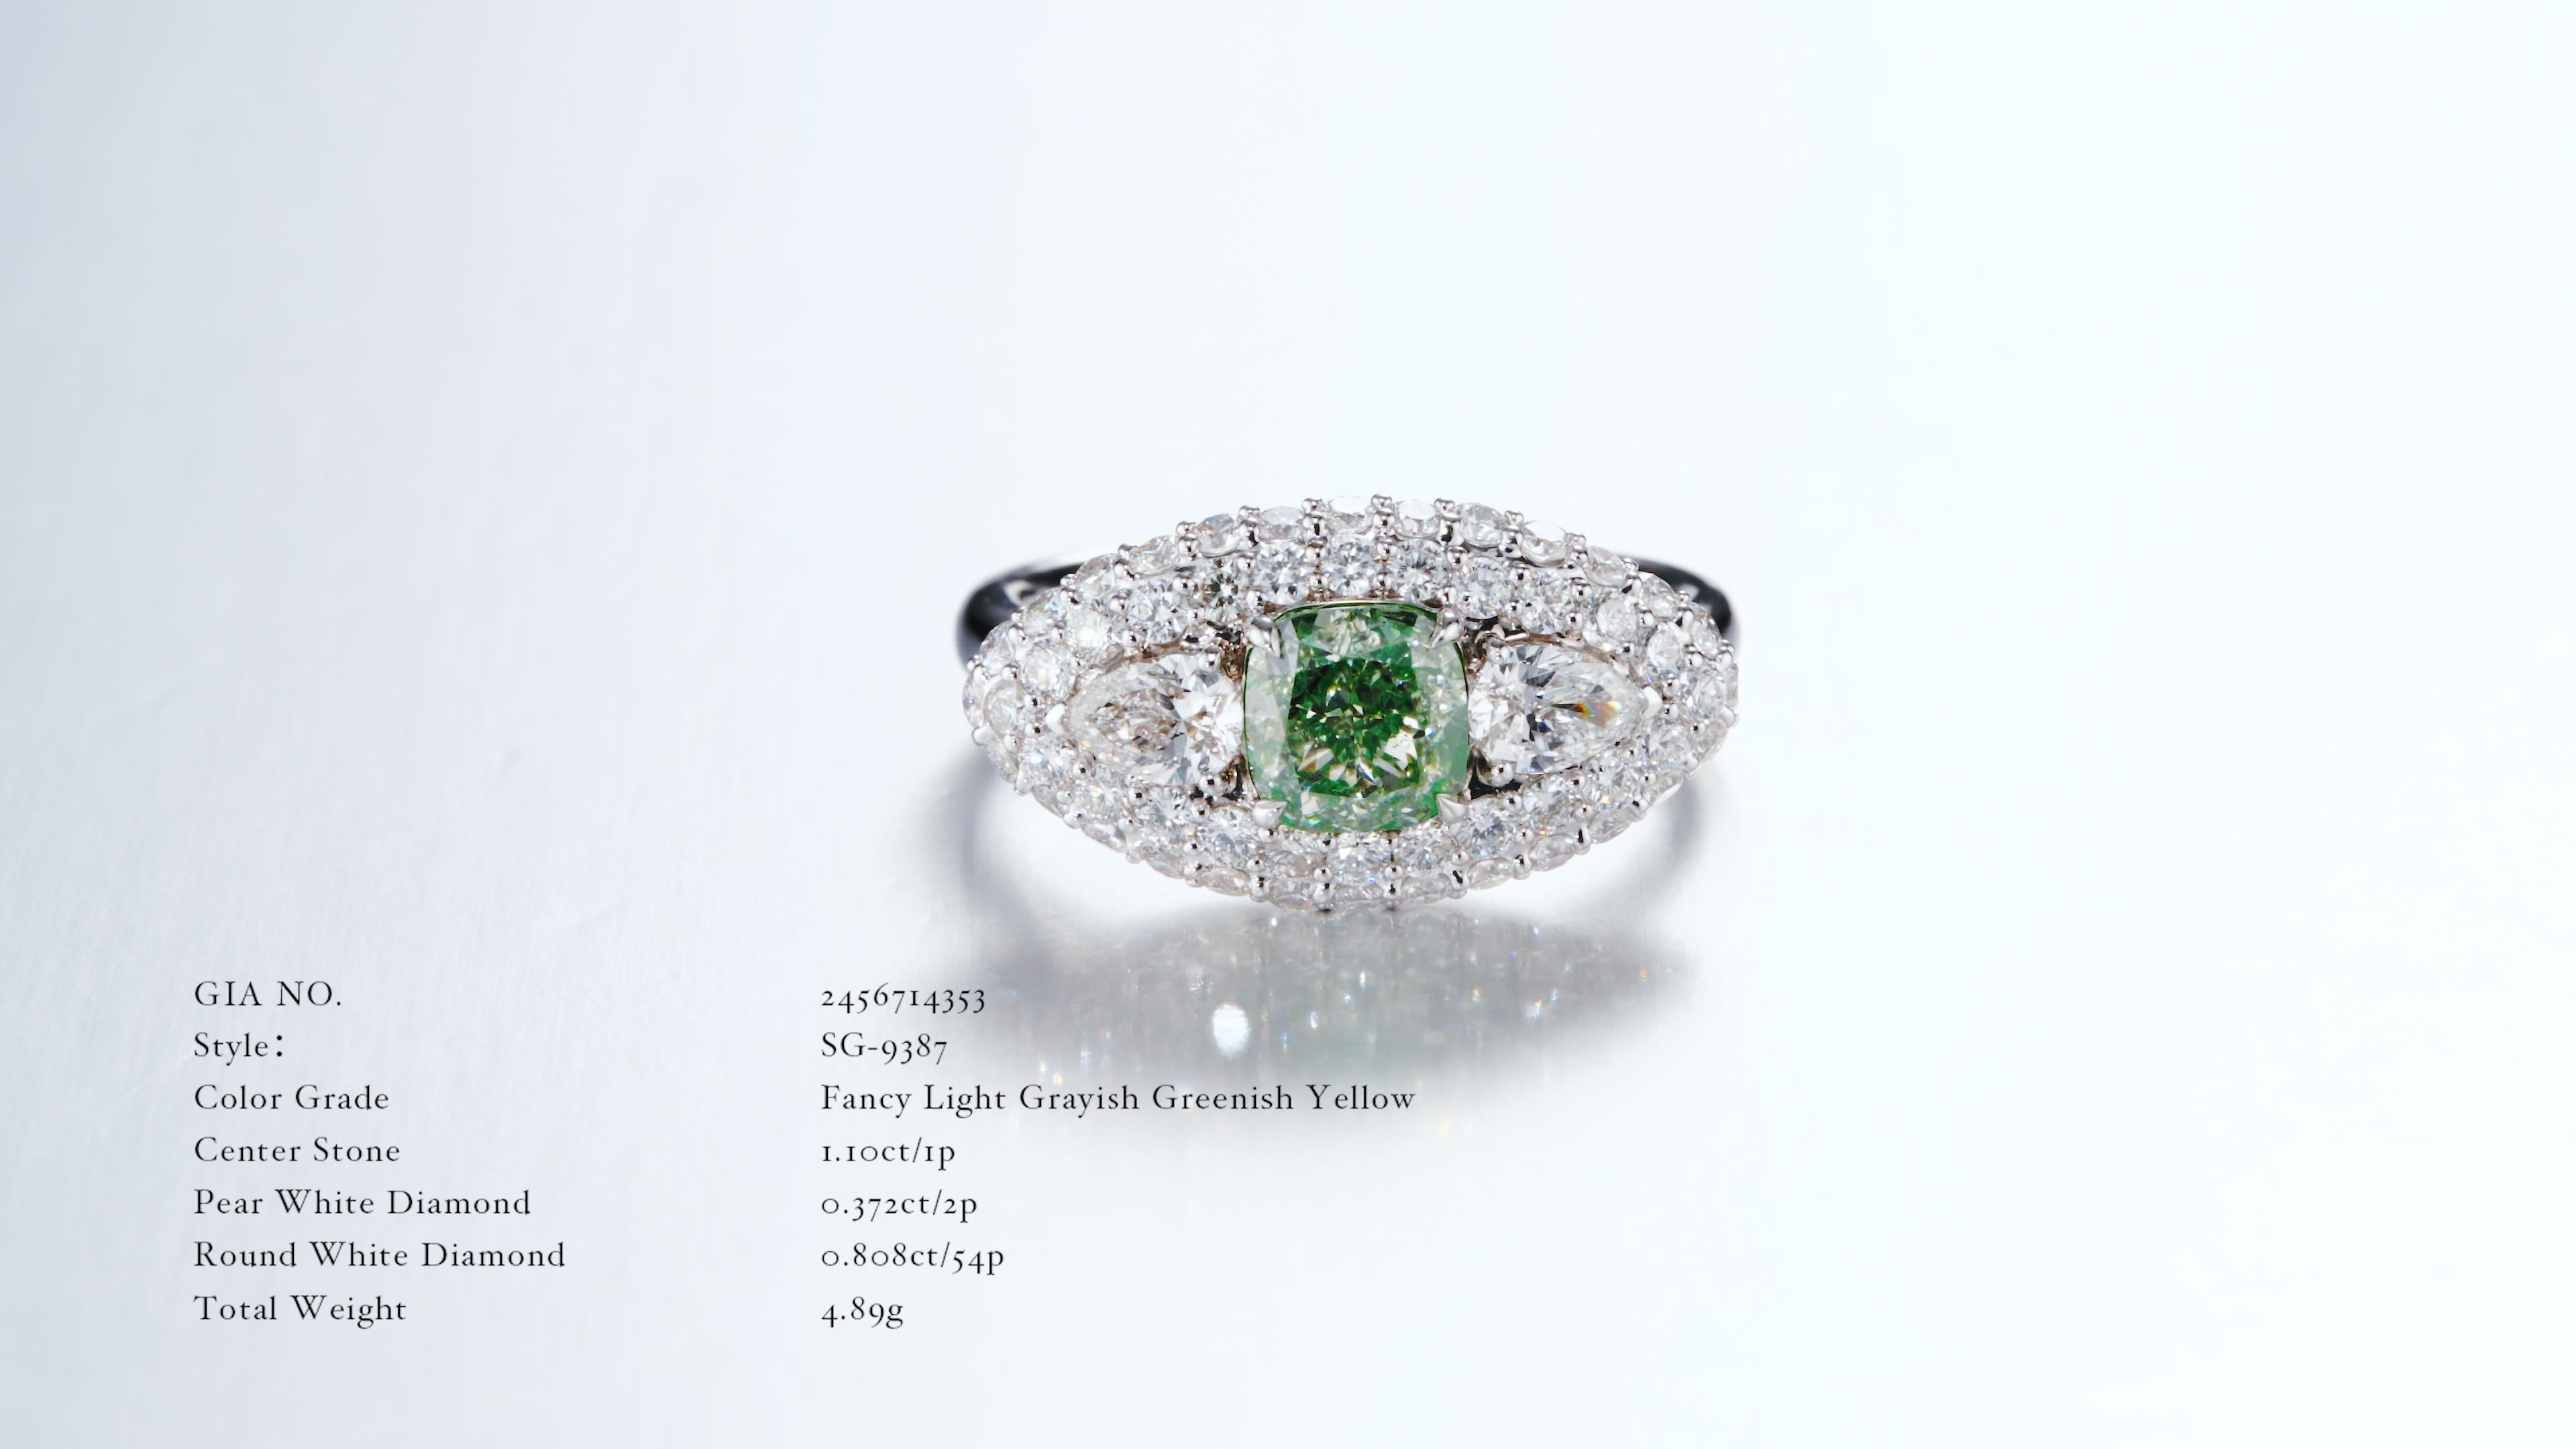 Introducing a truly enchanting piece that seamlessly blends sophistication and individuality - our 1.10-carat Fancy Light Grayish Greenish Yellow GIA Certified Center Stone Ring. This exquisite ring is a celebration of unique beauty, featuring a